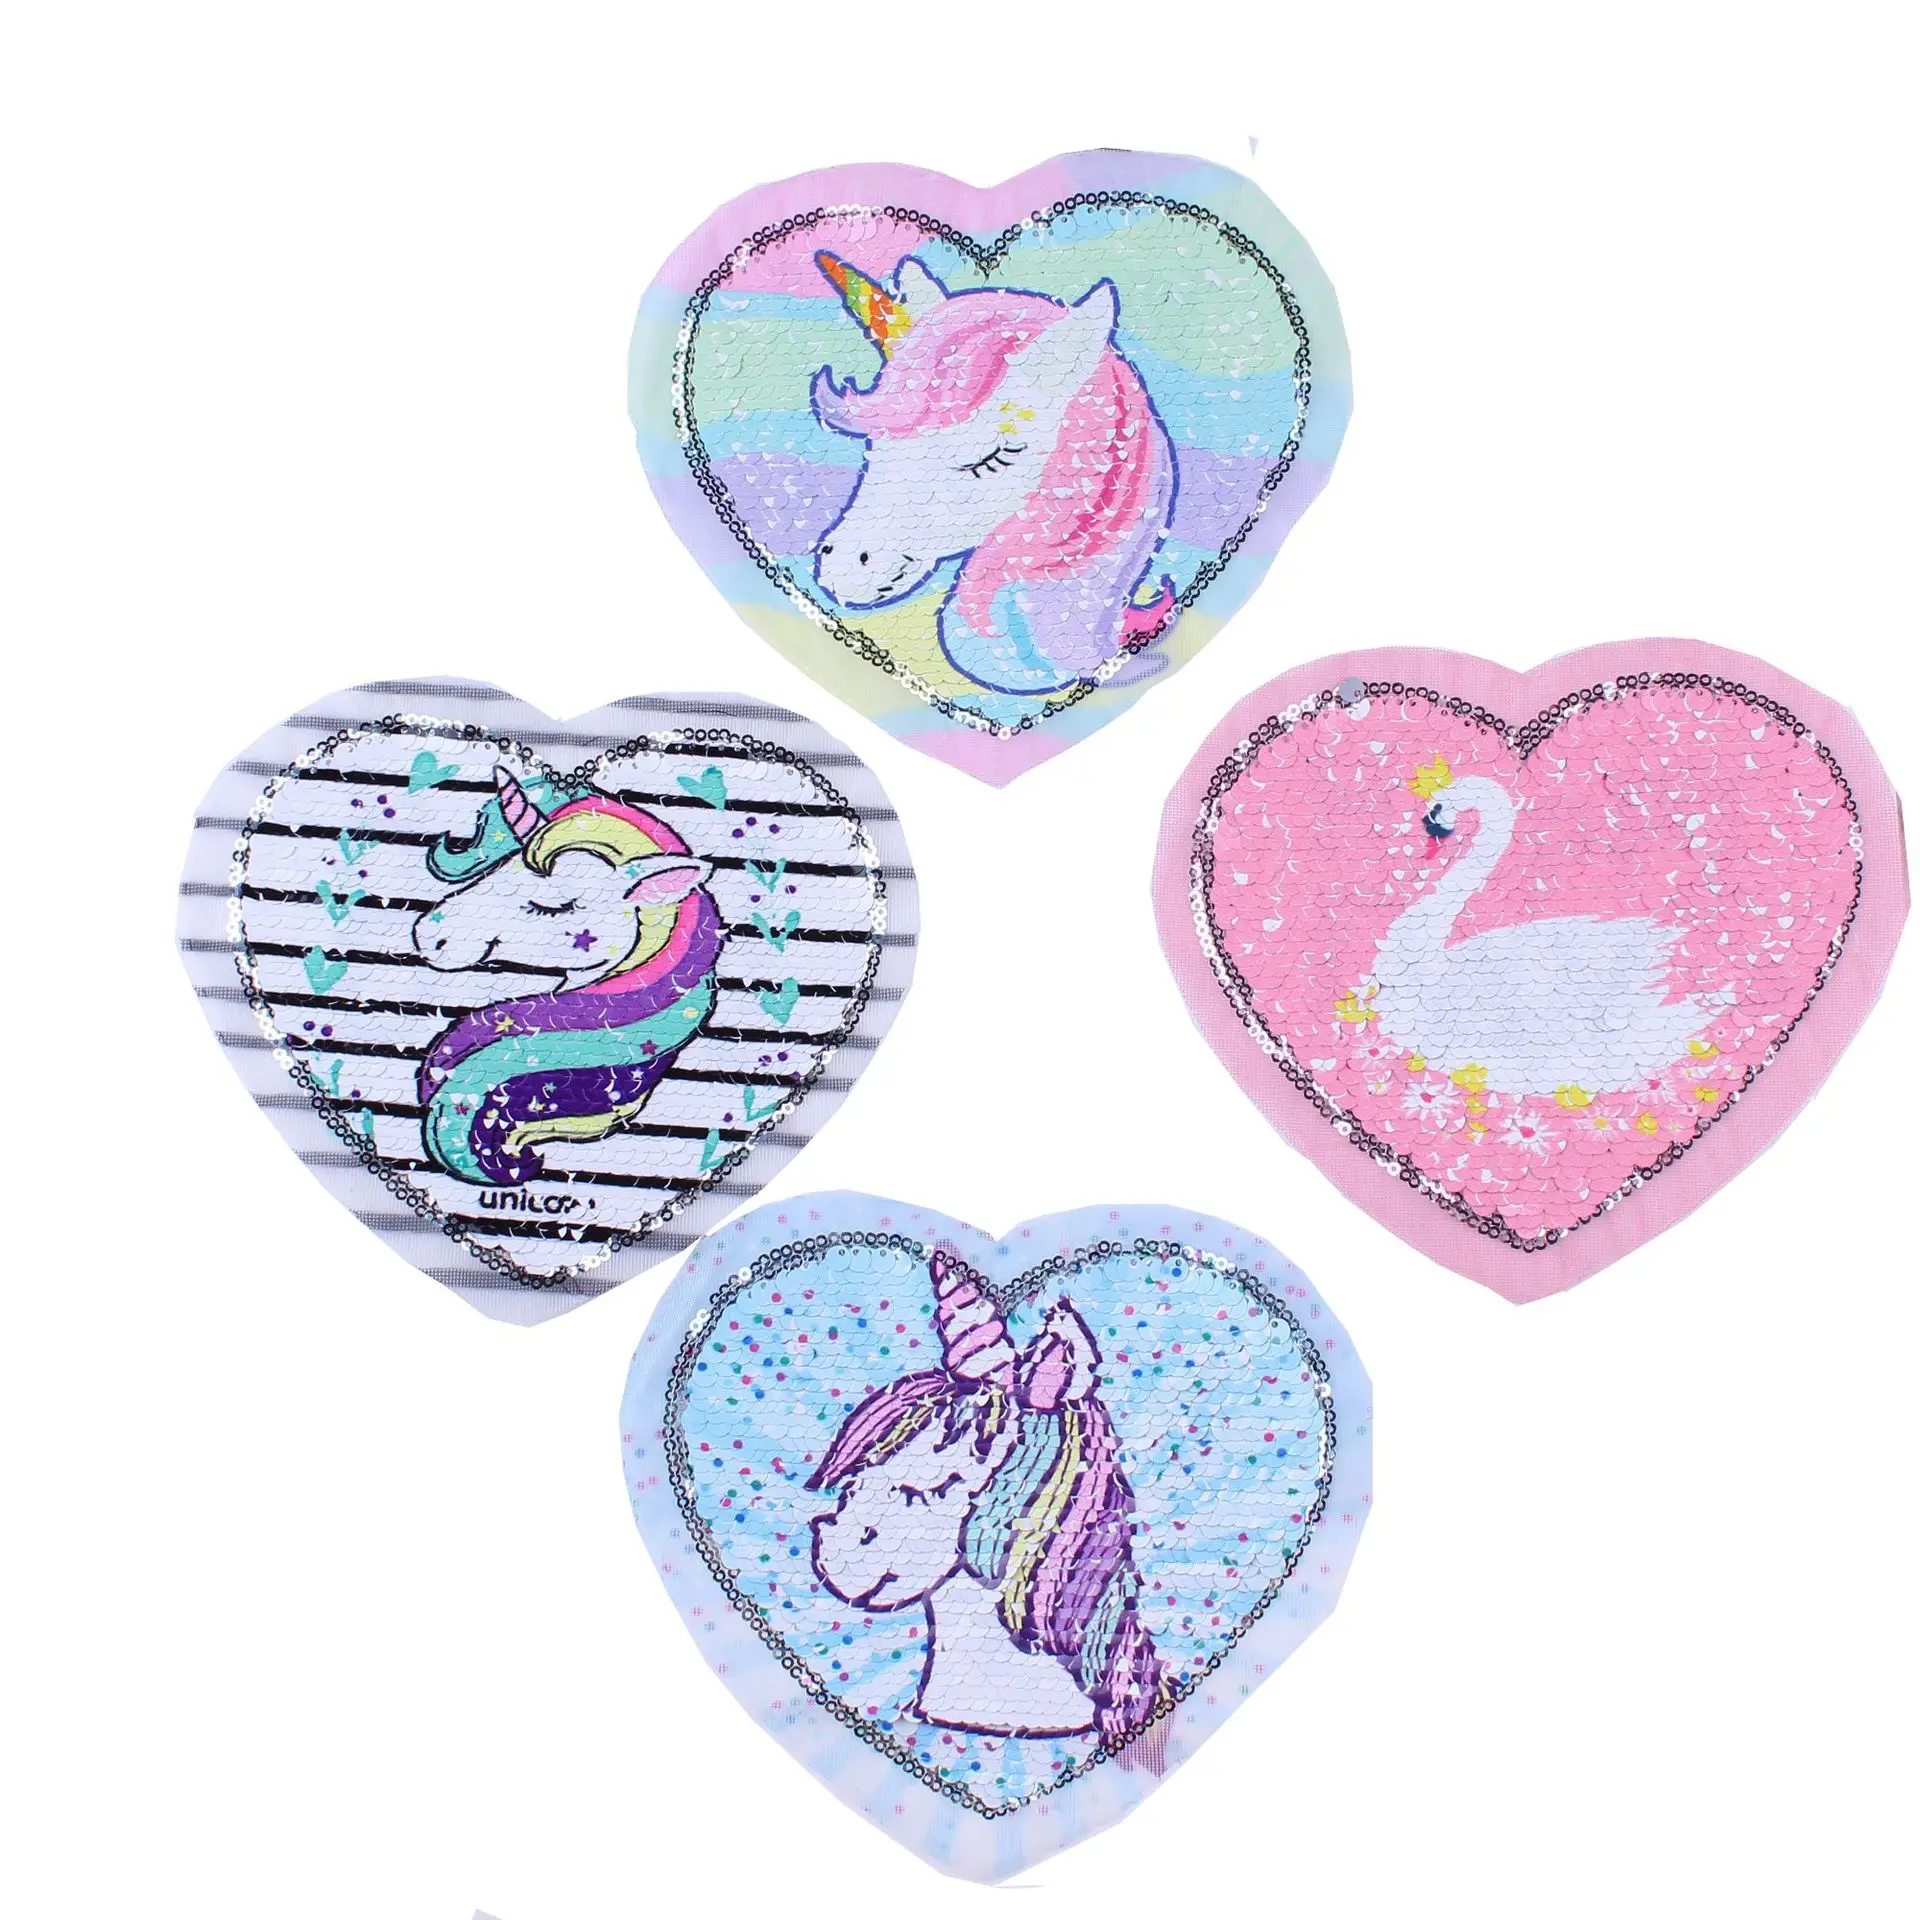 Animal sequins, beads, embroidered cloth, unicorns, patches, straps, ironing, clothing accessories, wholesale